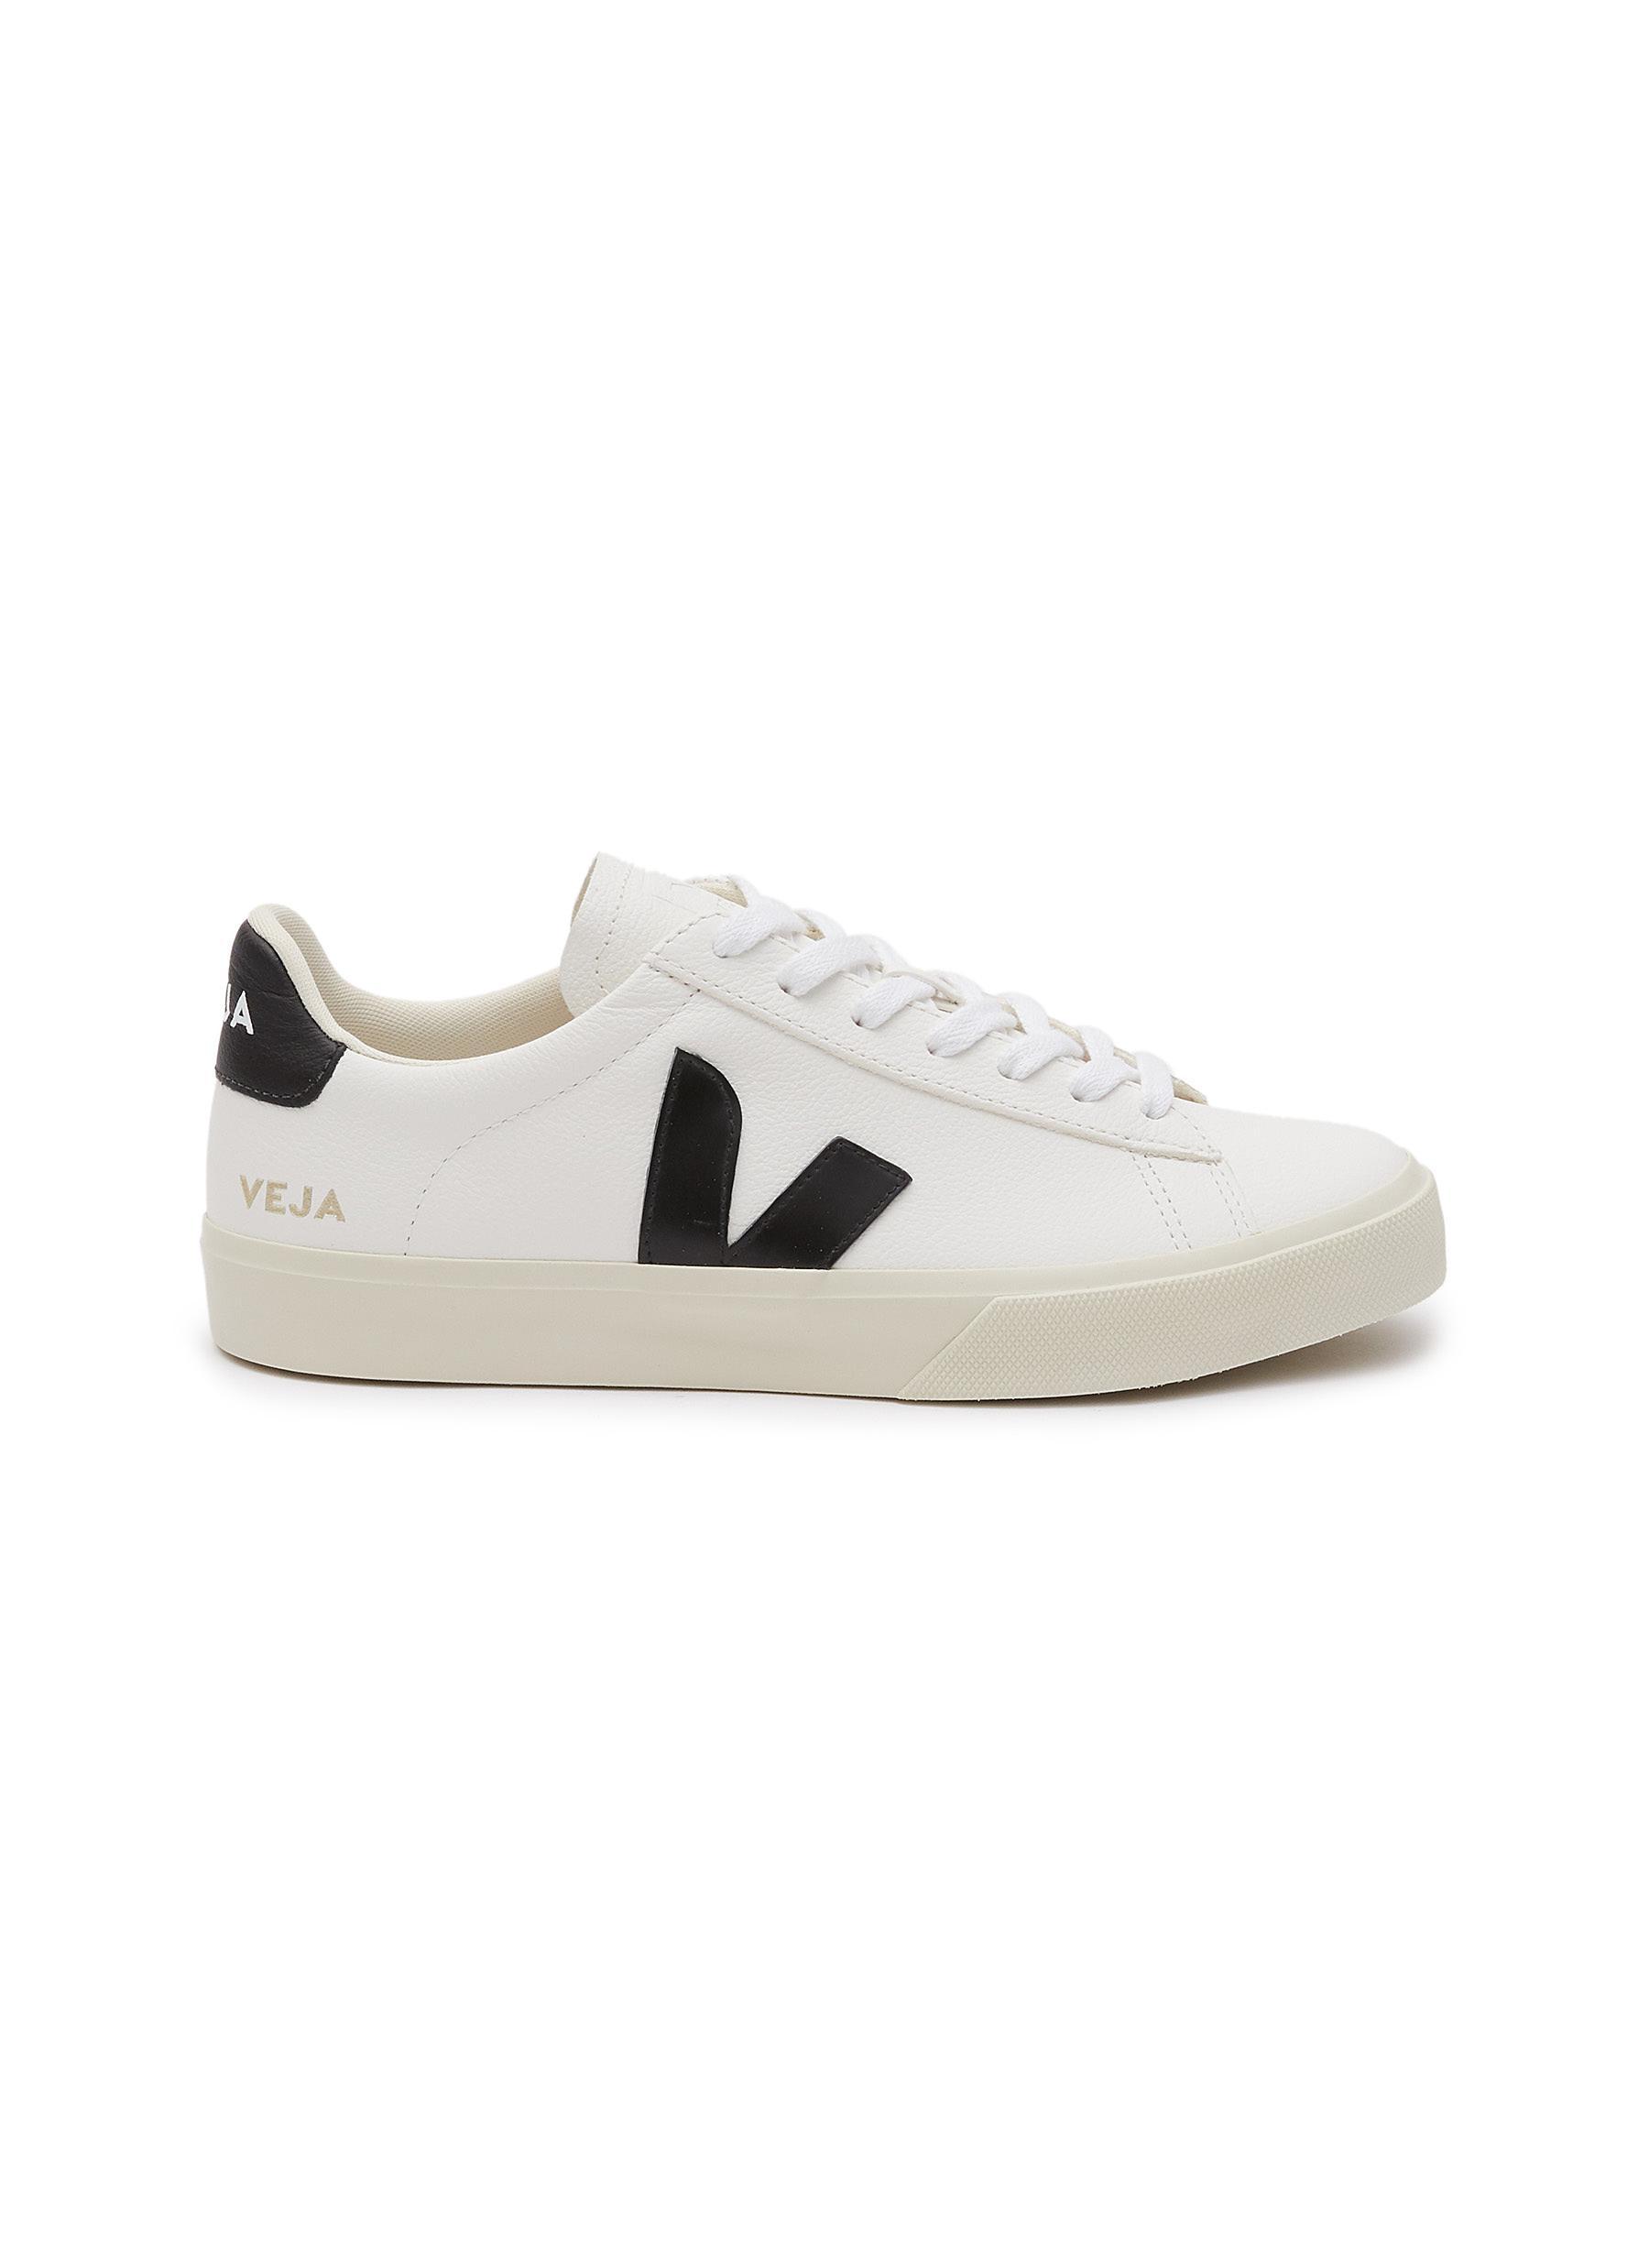 Veja Campo Lace-up Sneakers in White | Lyst